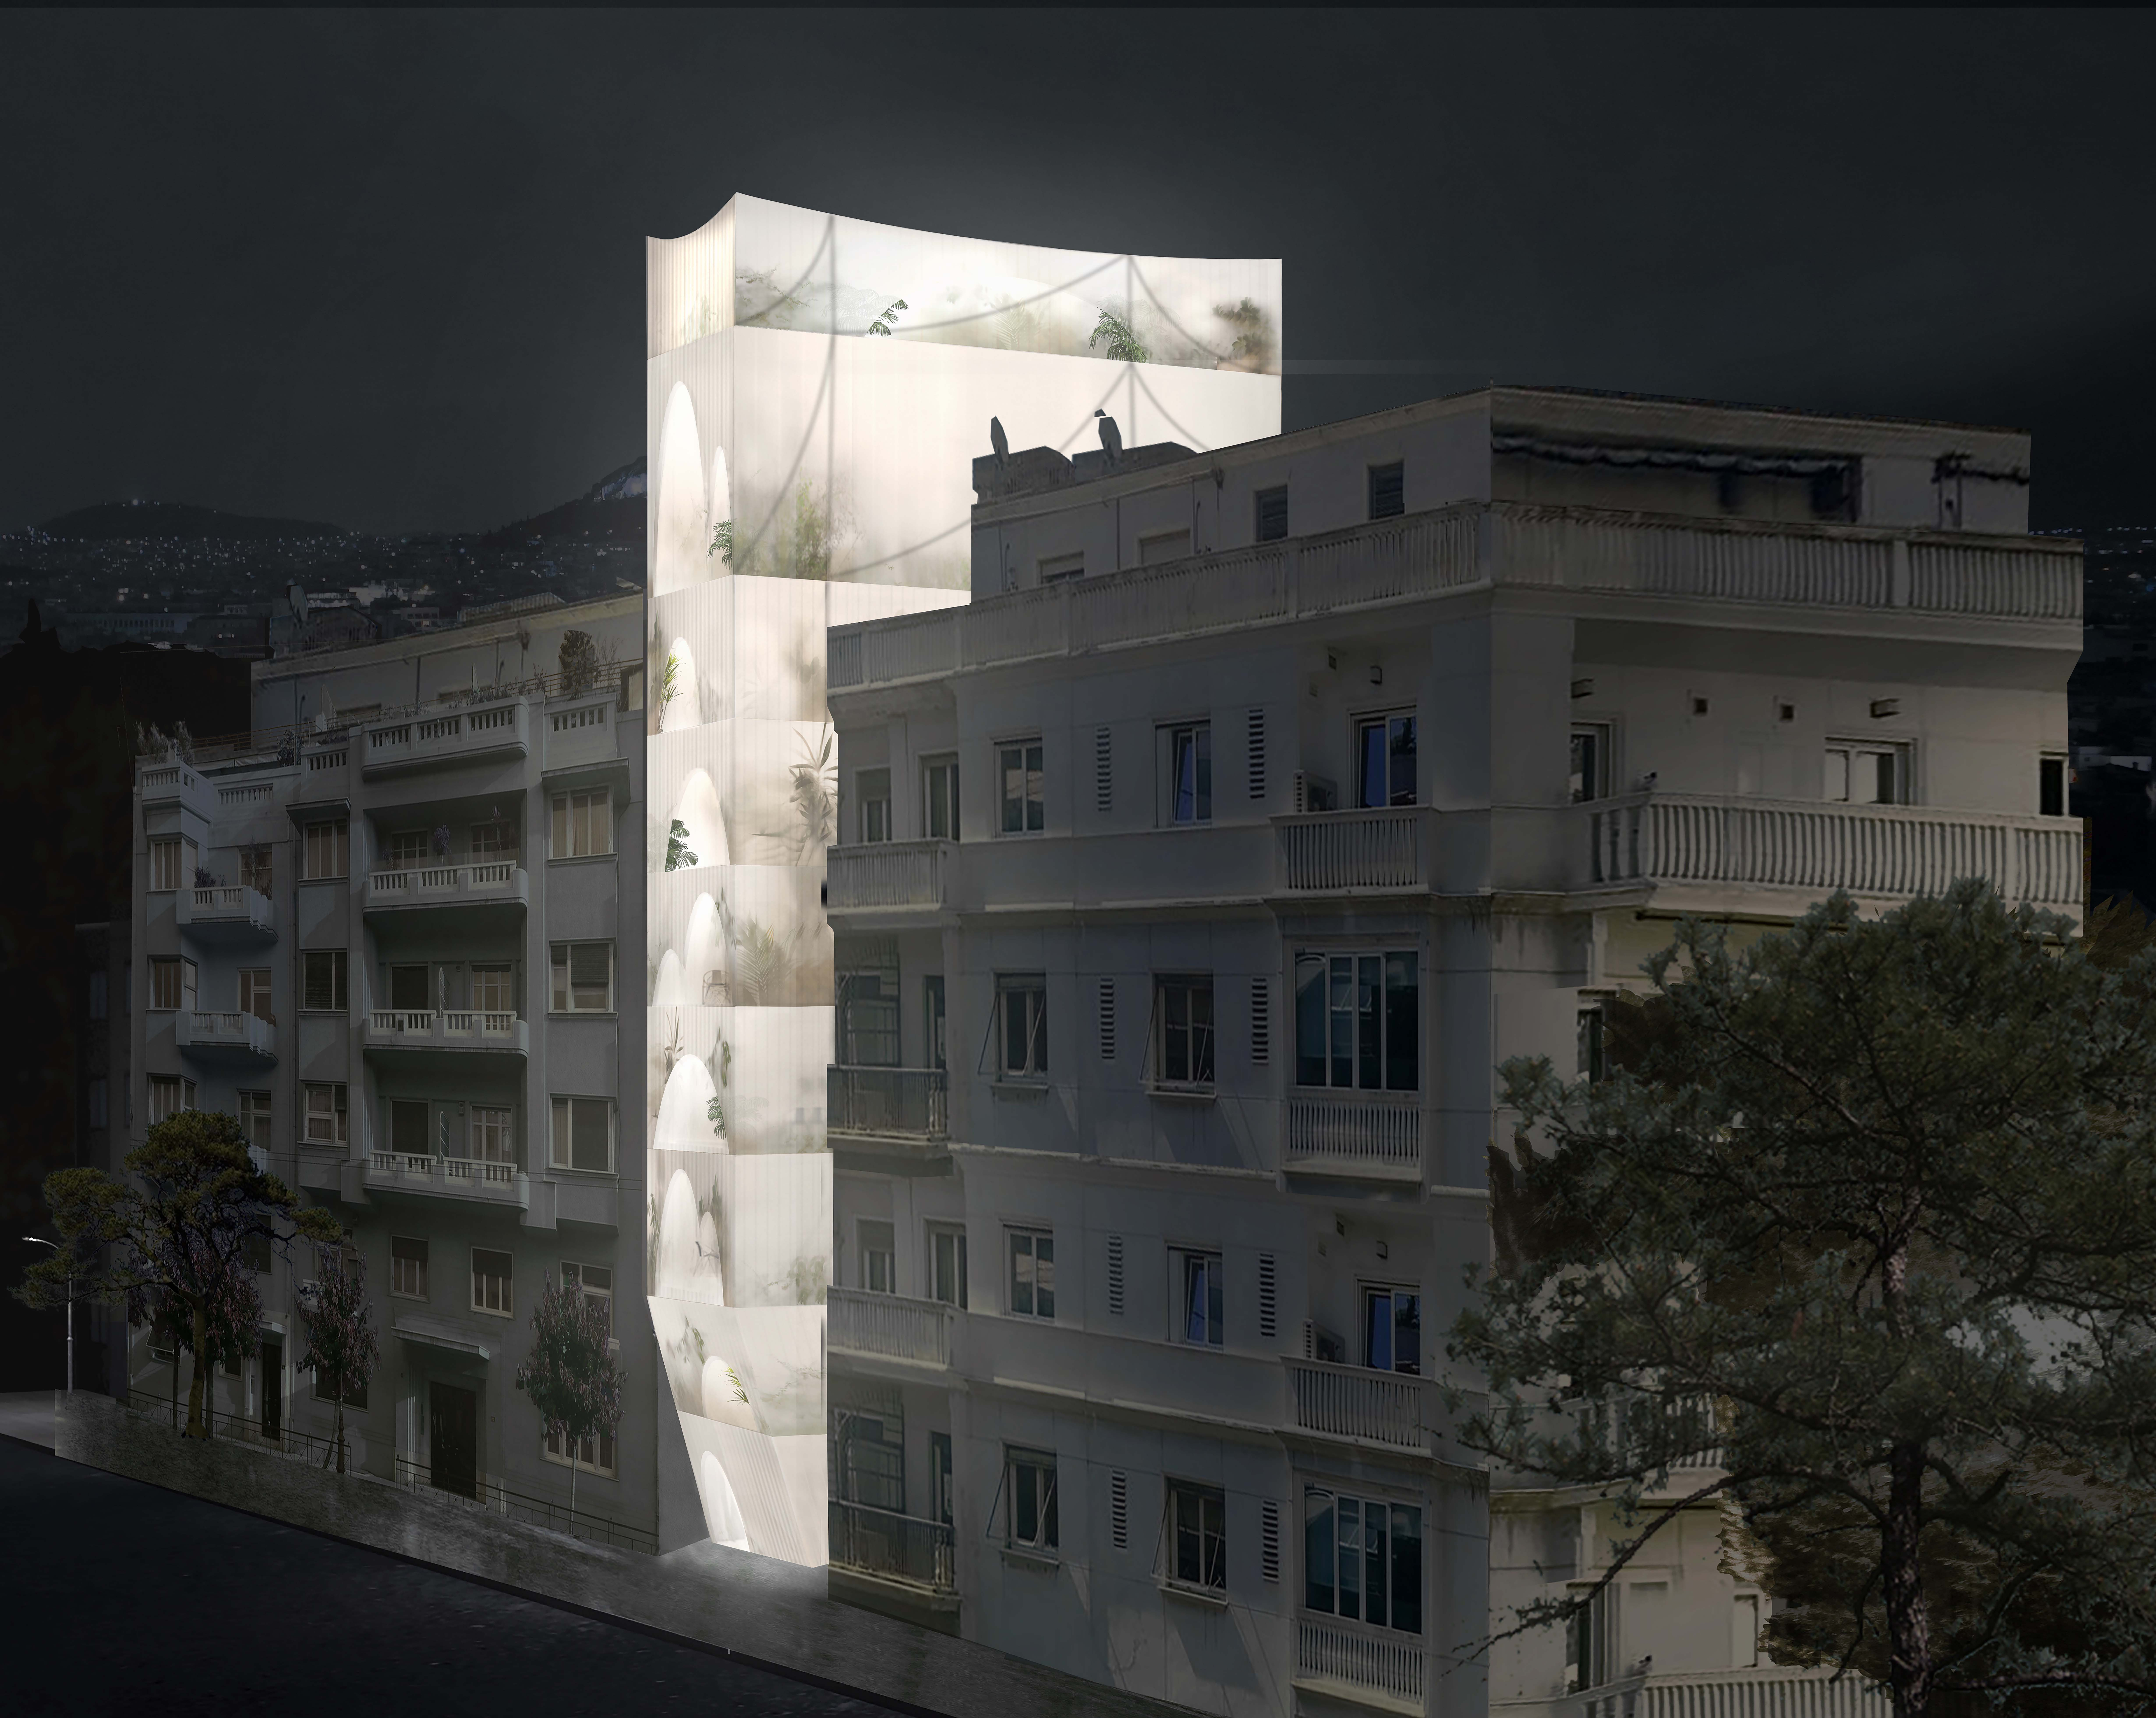 Uniting Space with Translucent Walls H_1002 by 314 architecture studio, Athens, Greece